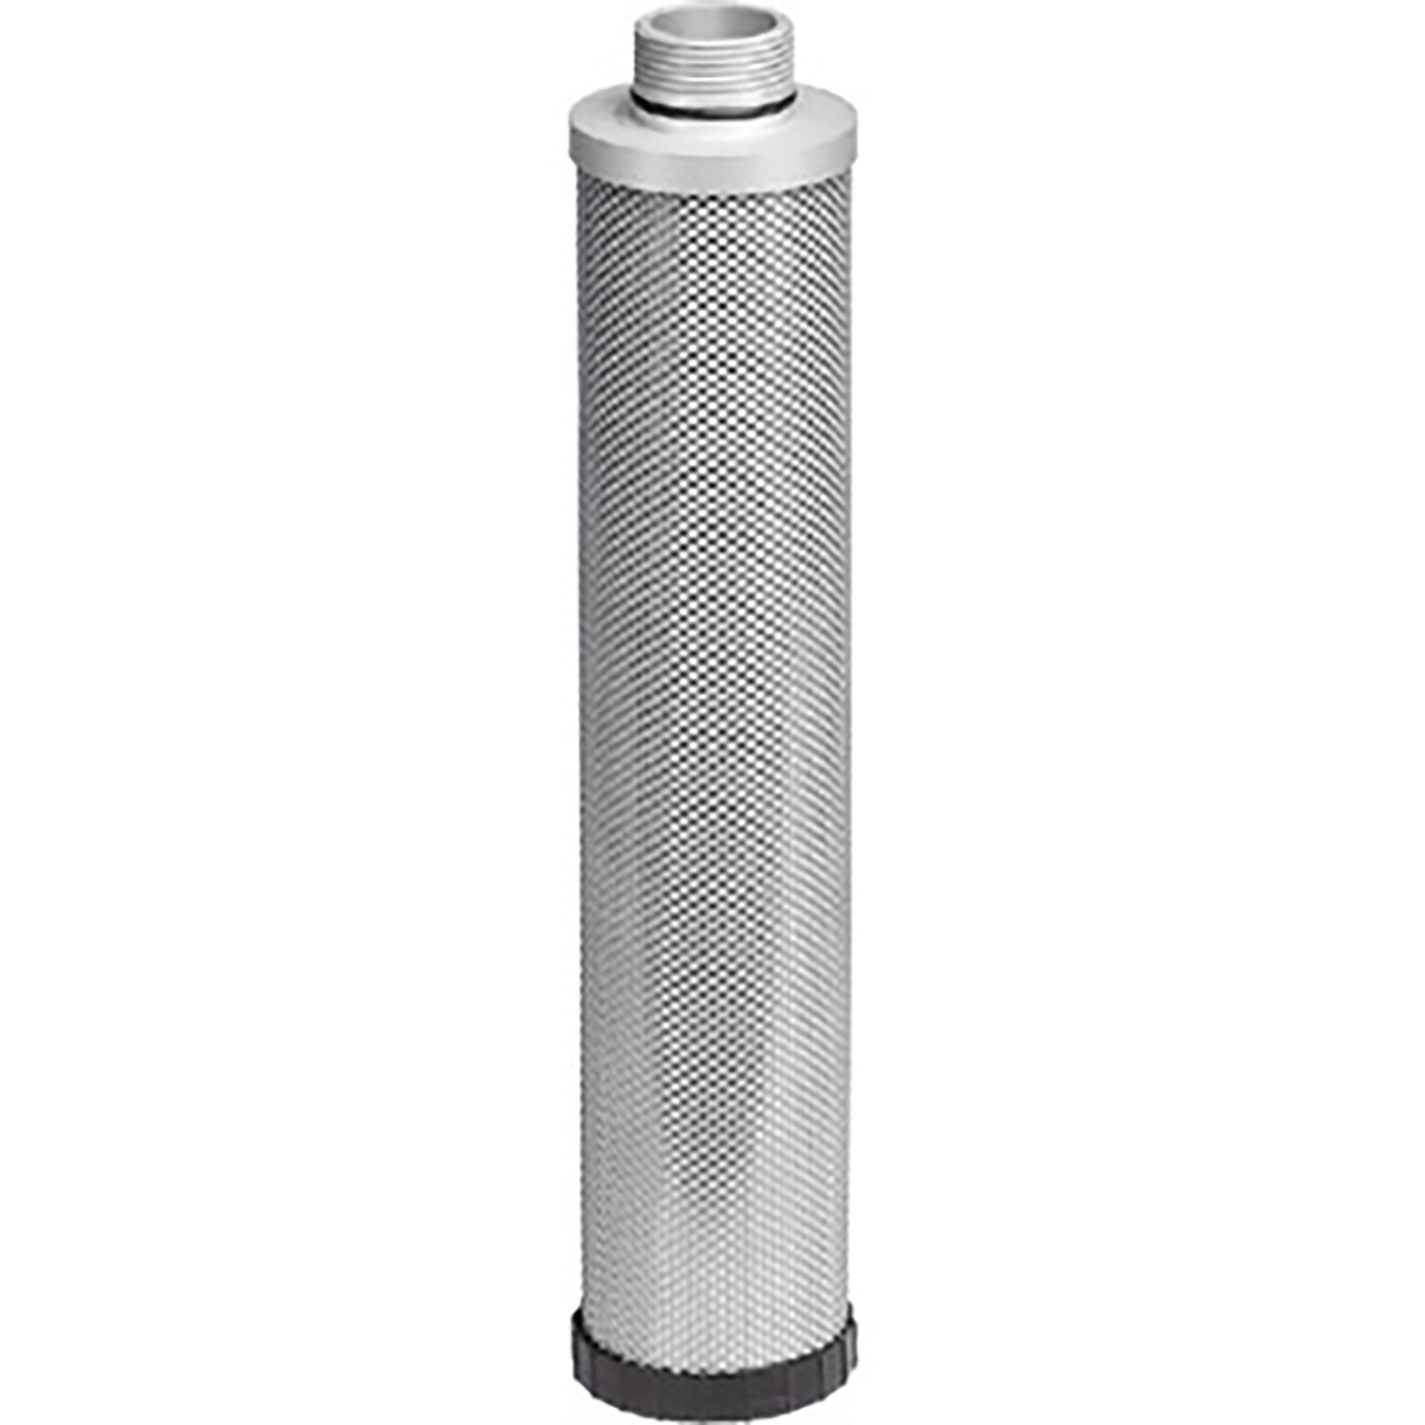 Filter Activated Carbon Cartridge MS Series